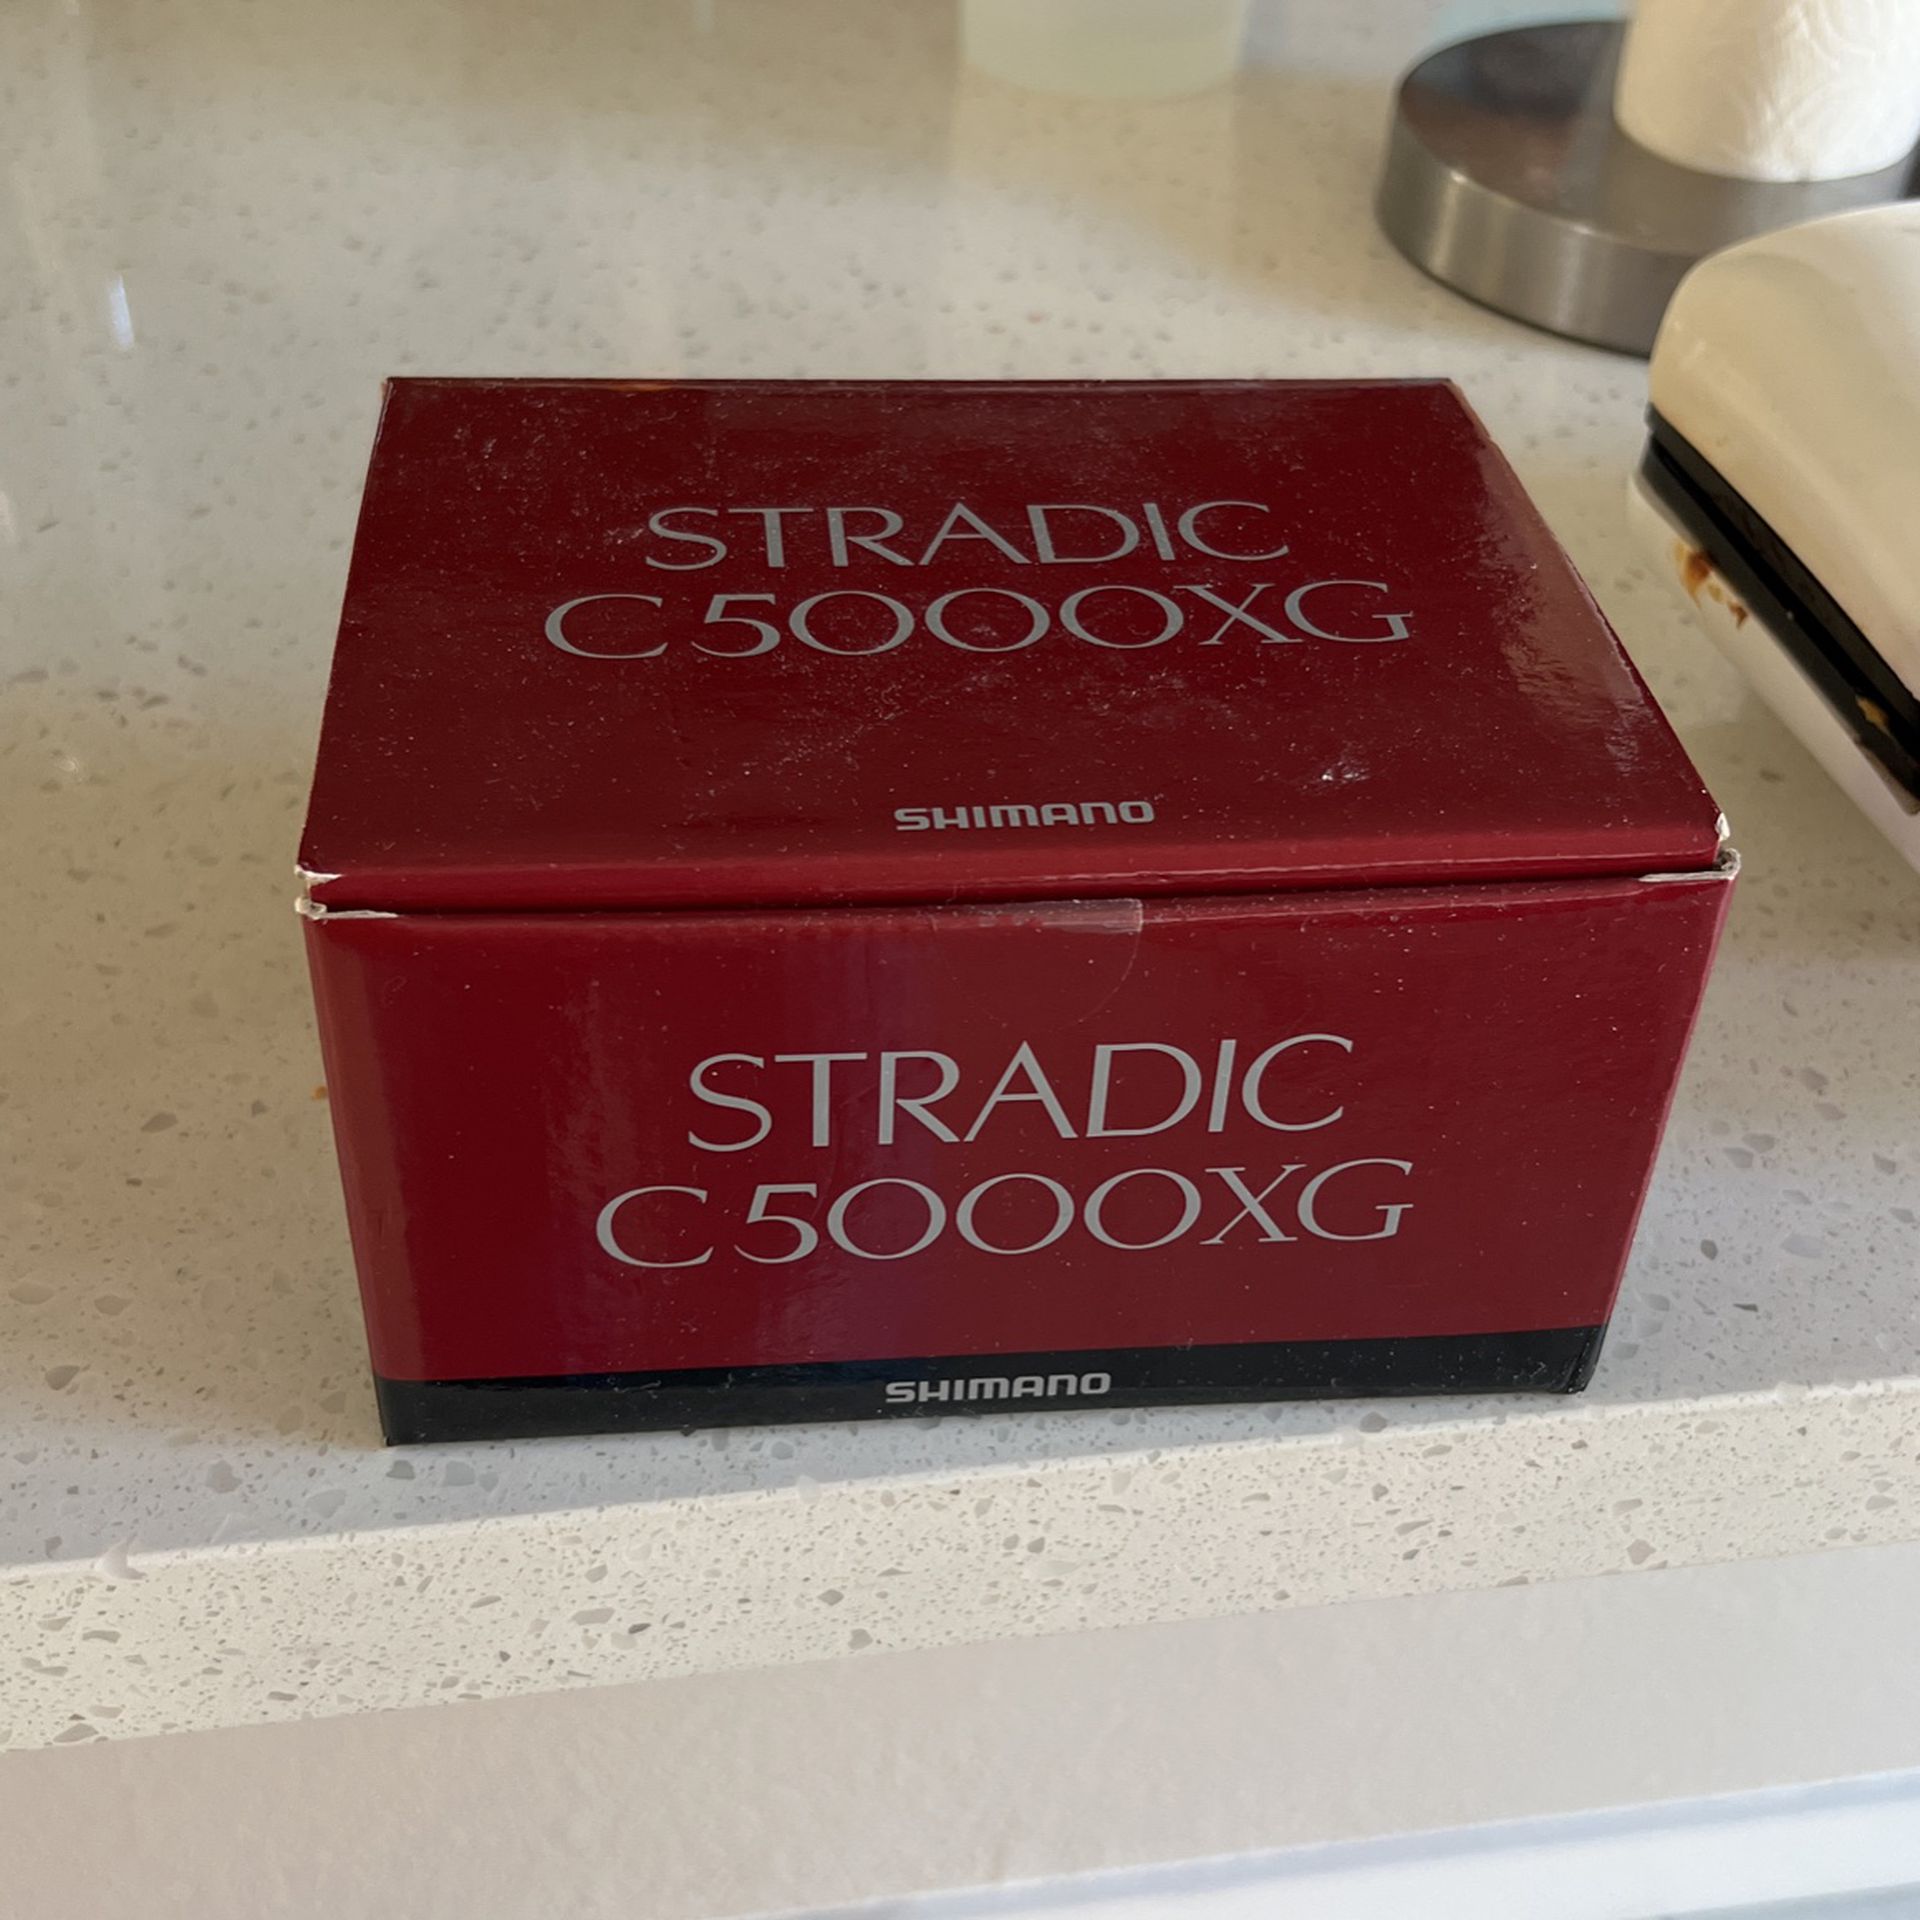 Selling Box Only Shimano Stradic C5000xg. for Sale in Rancho